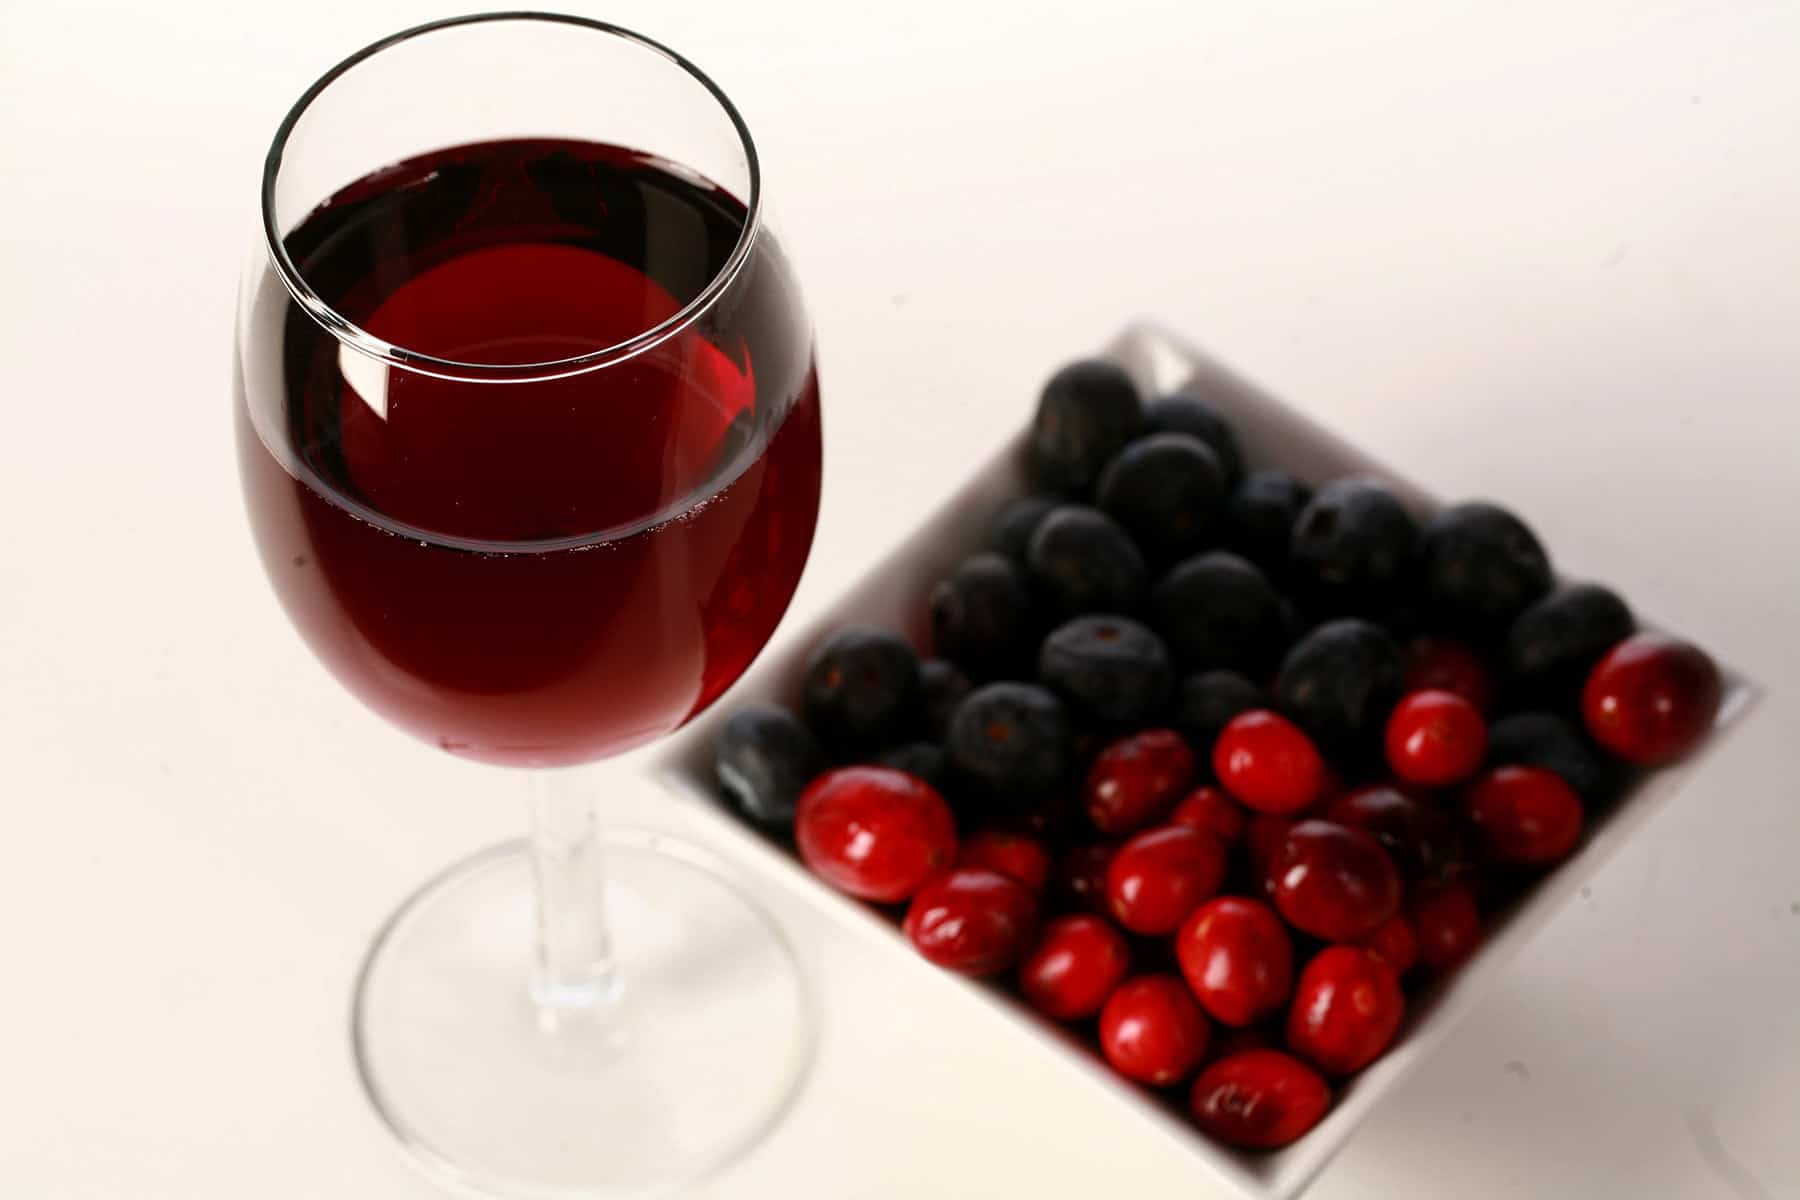 A glass of red wine is pictured next to a small bowl of cranberries and blueberries.